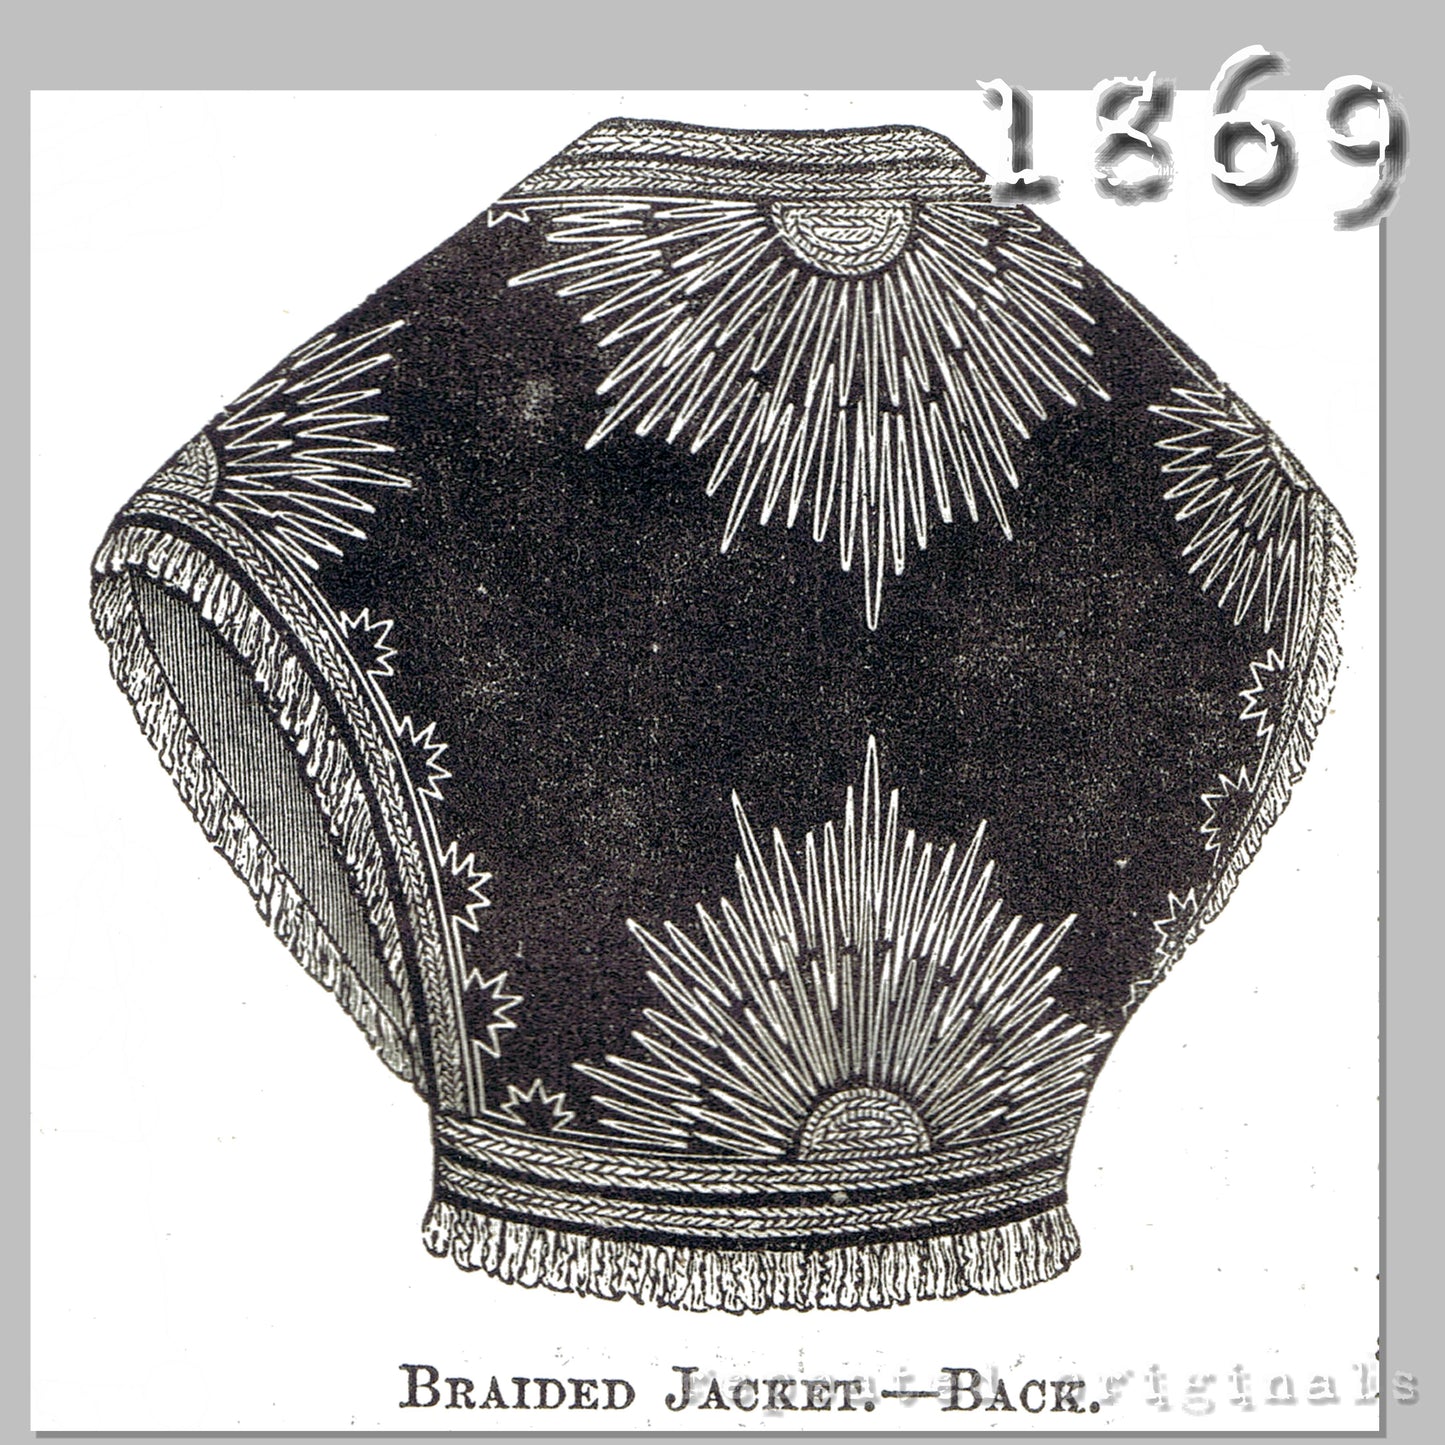 1869 Braided Jacket Sewing Pattern - INSTANT DOWNLOAD PDF